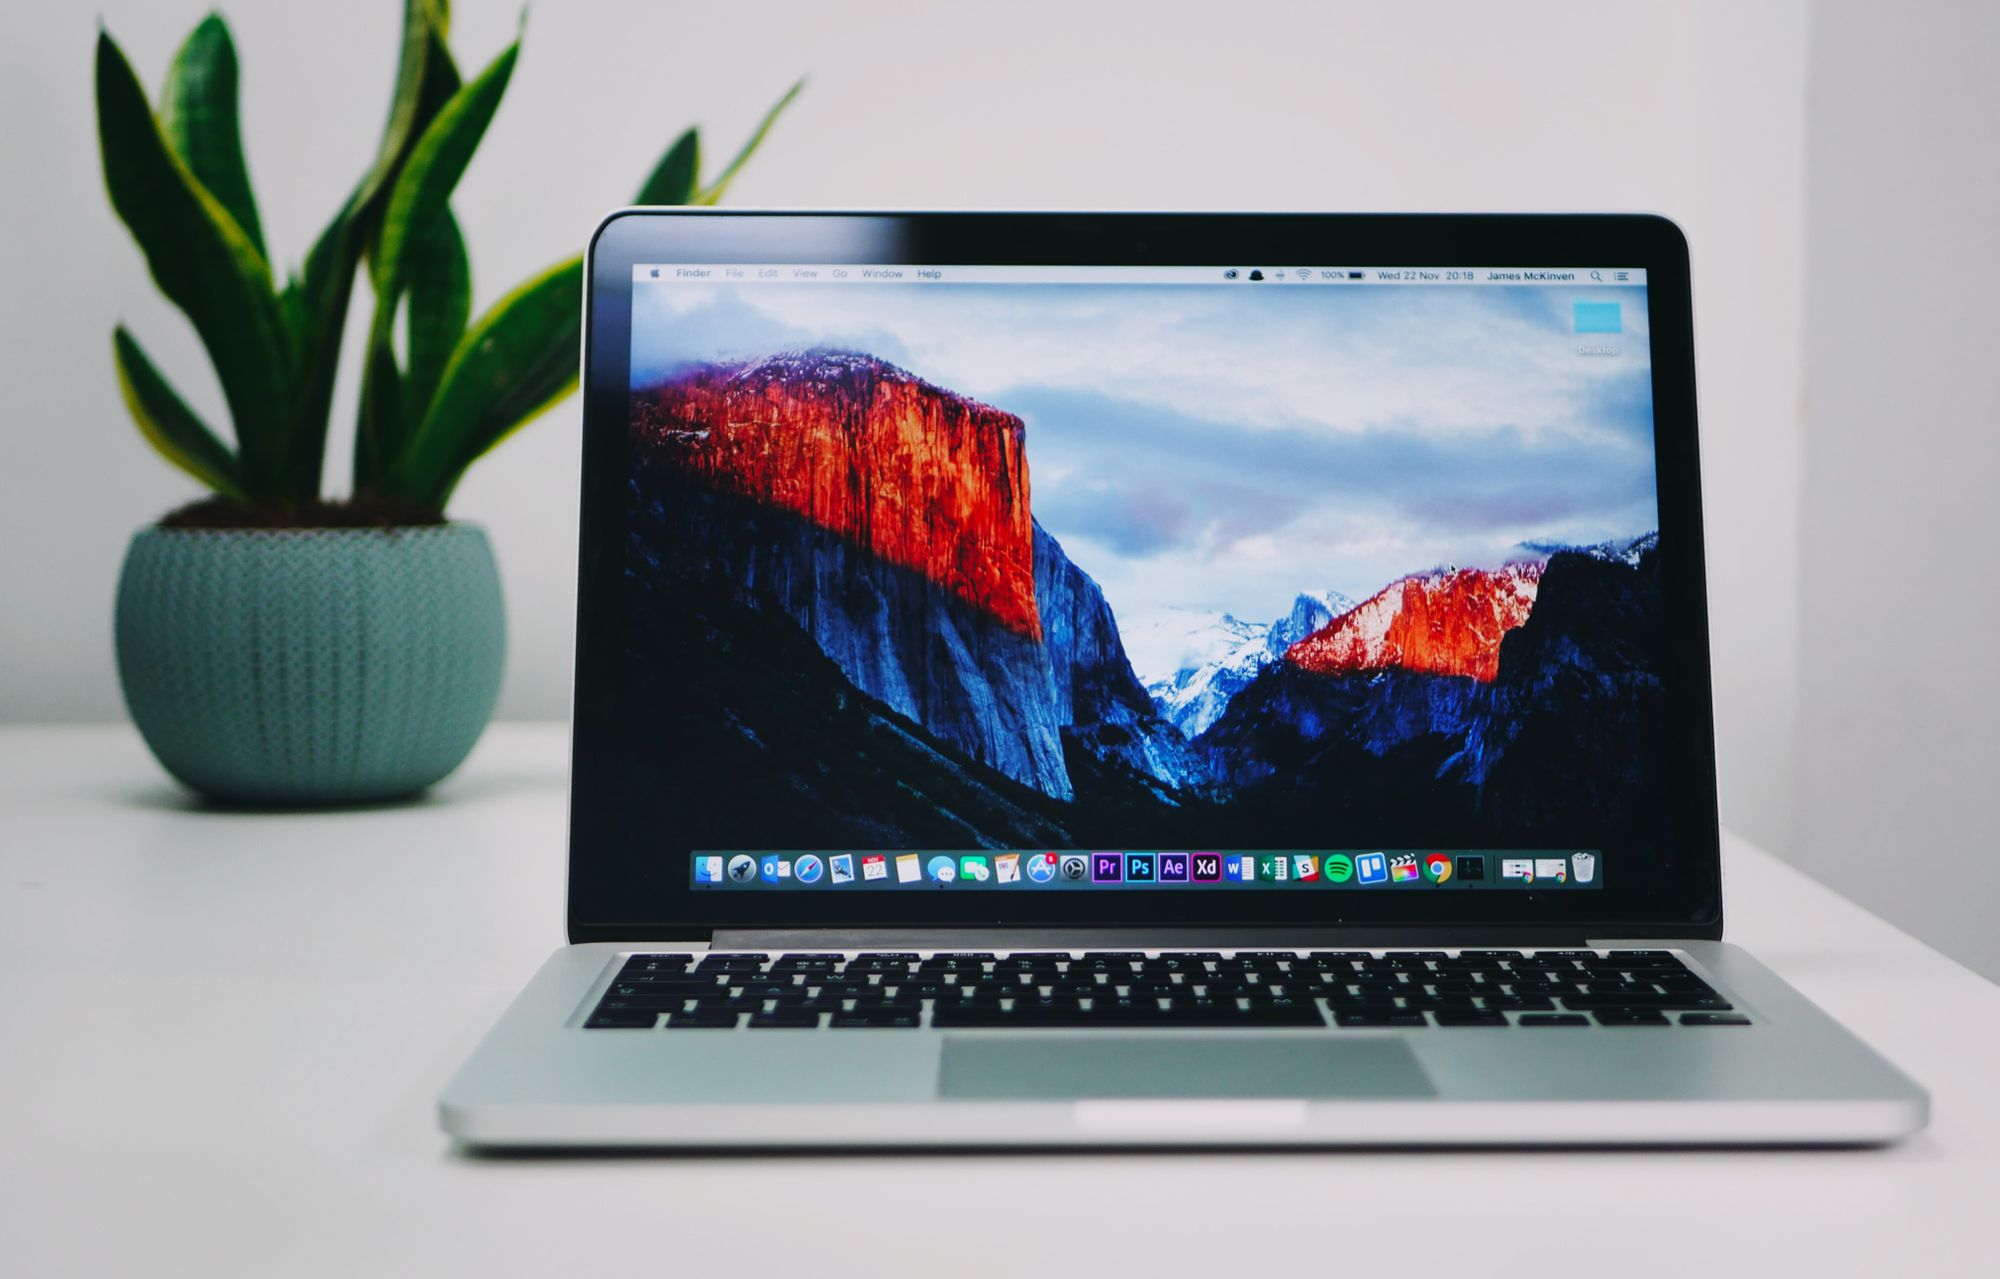 How to open apps on macbook from unidentified developer